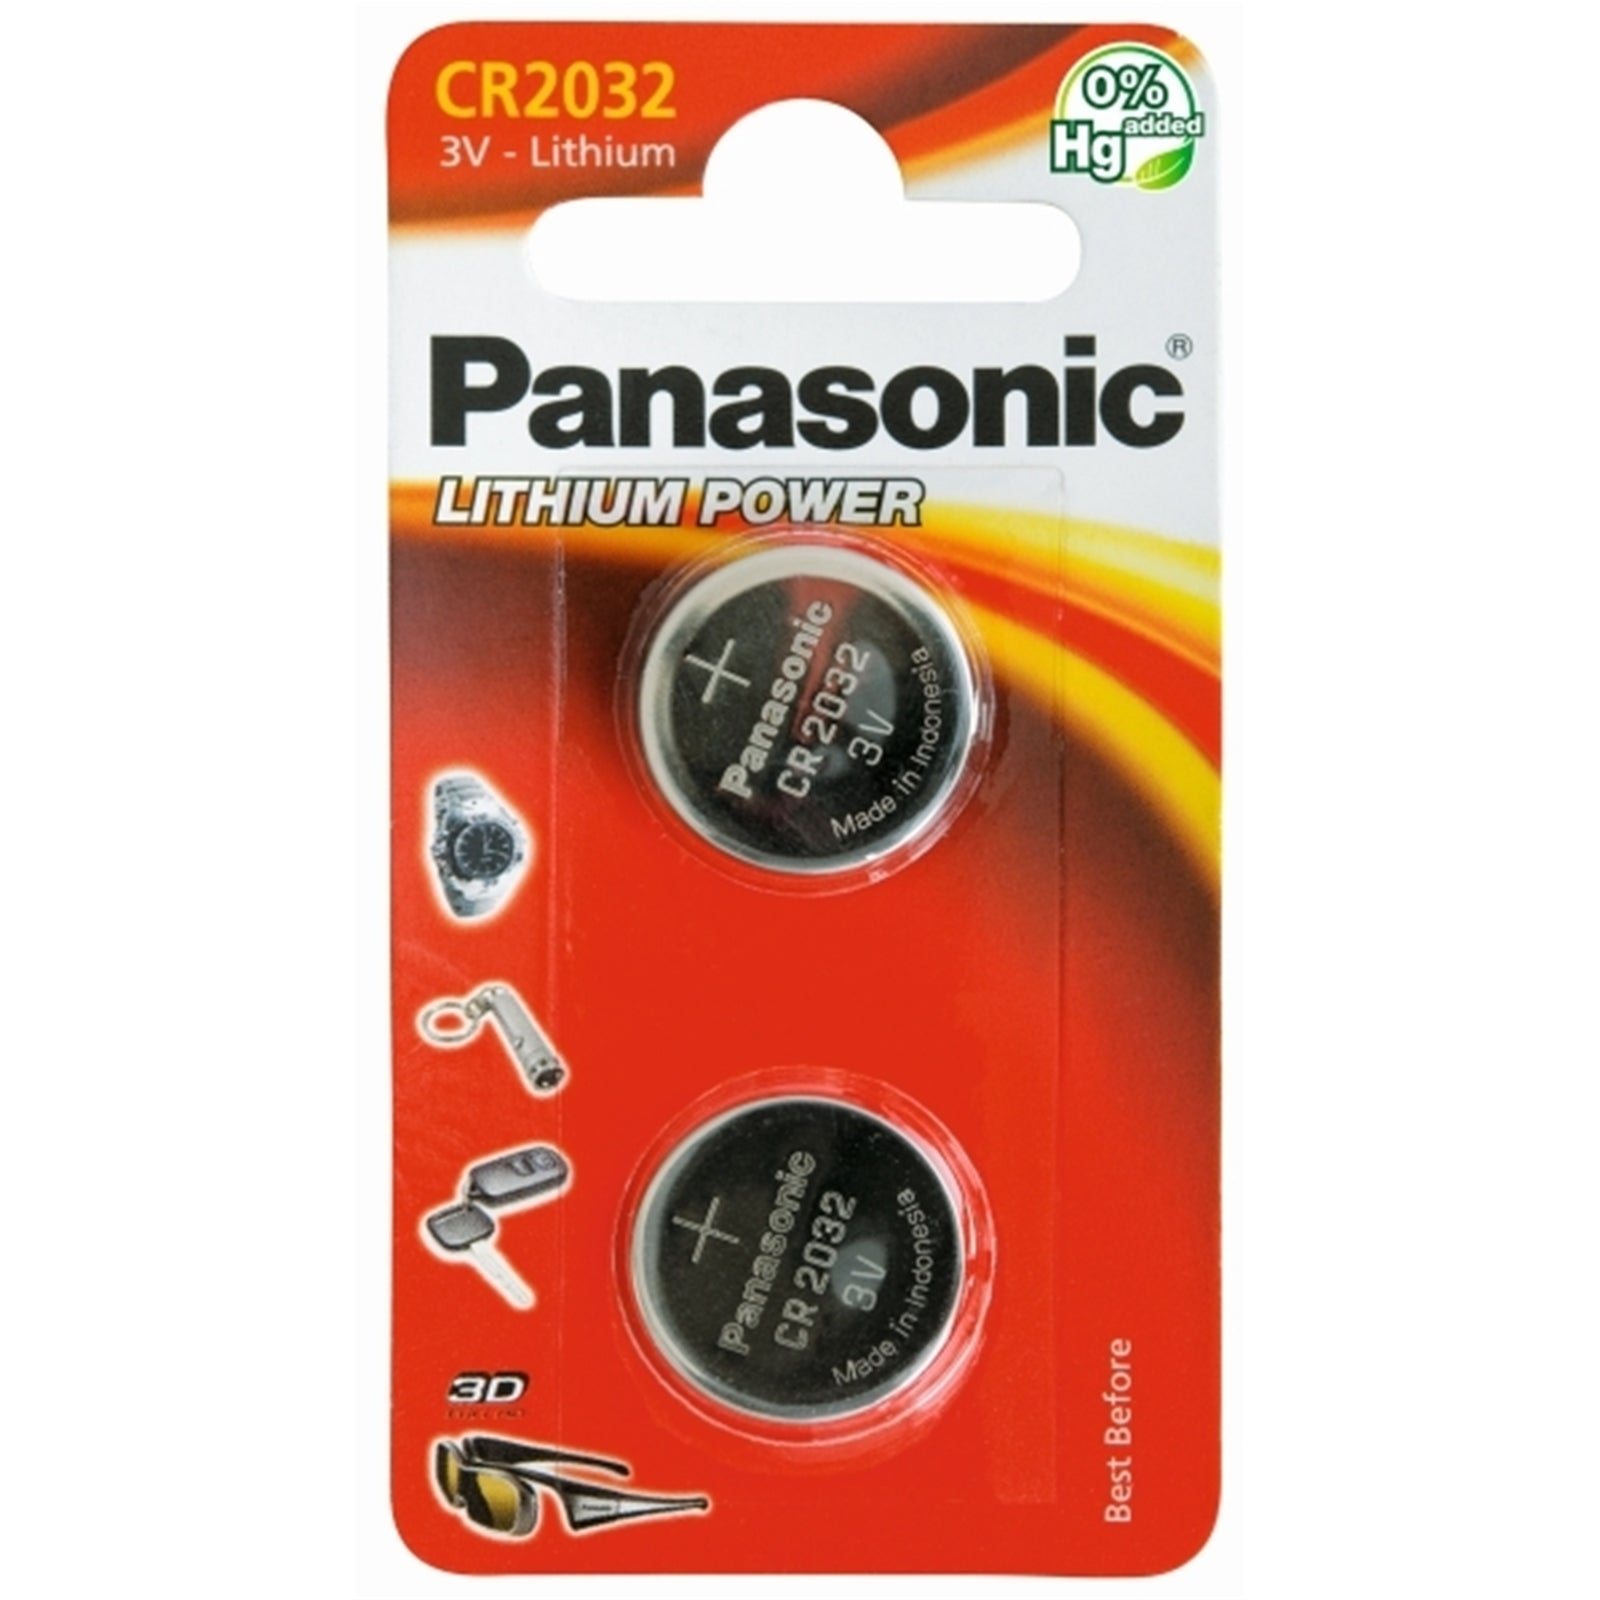 Panasonic CR2032 3V Lithium Coin Cell Batteries Pack of 2